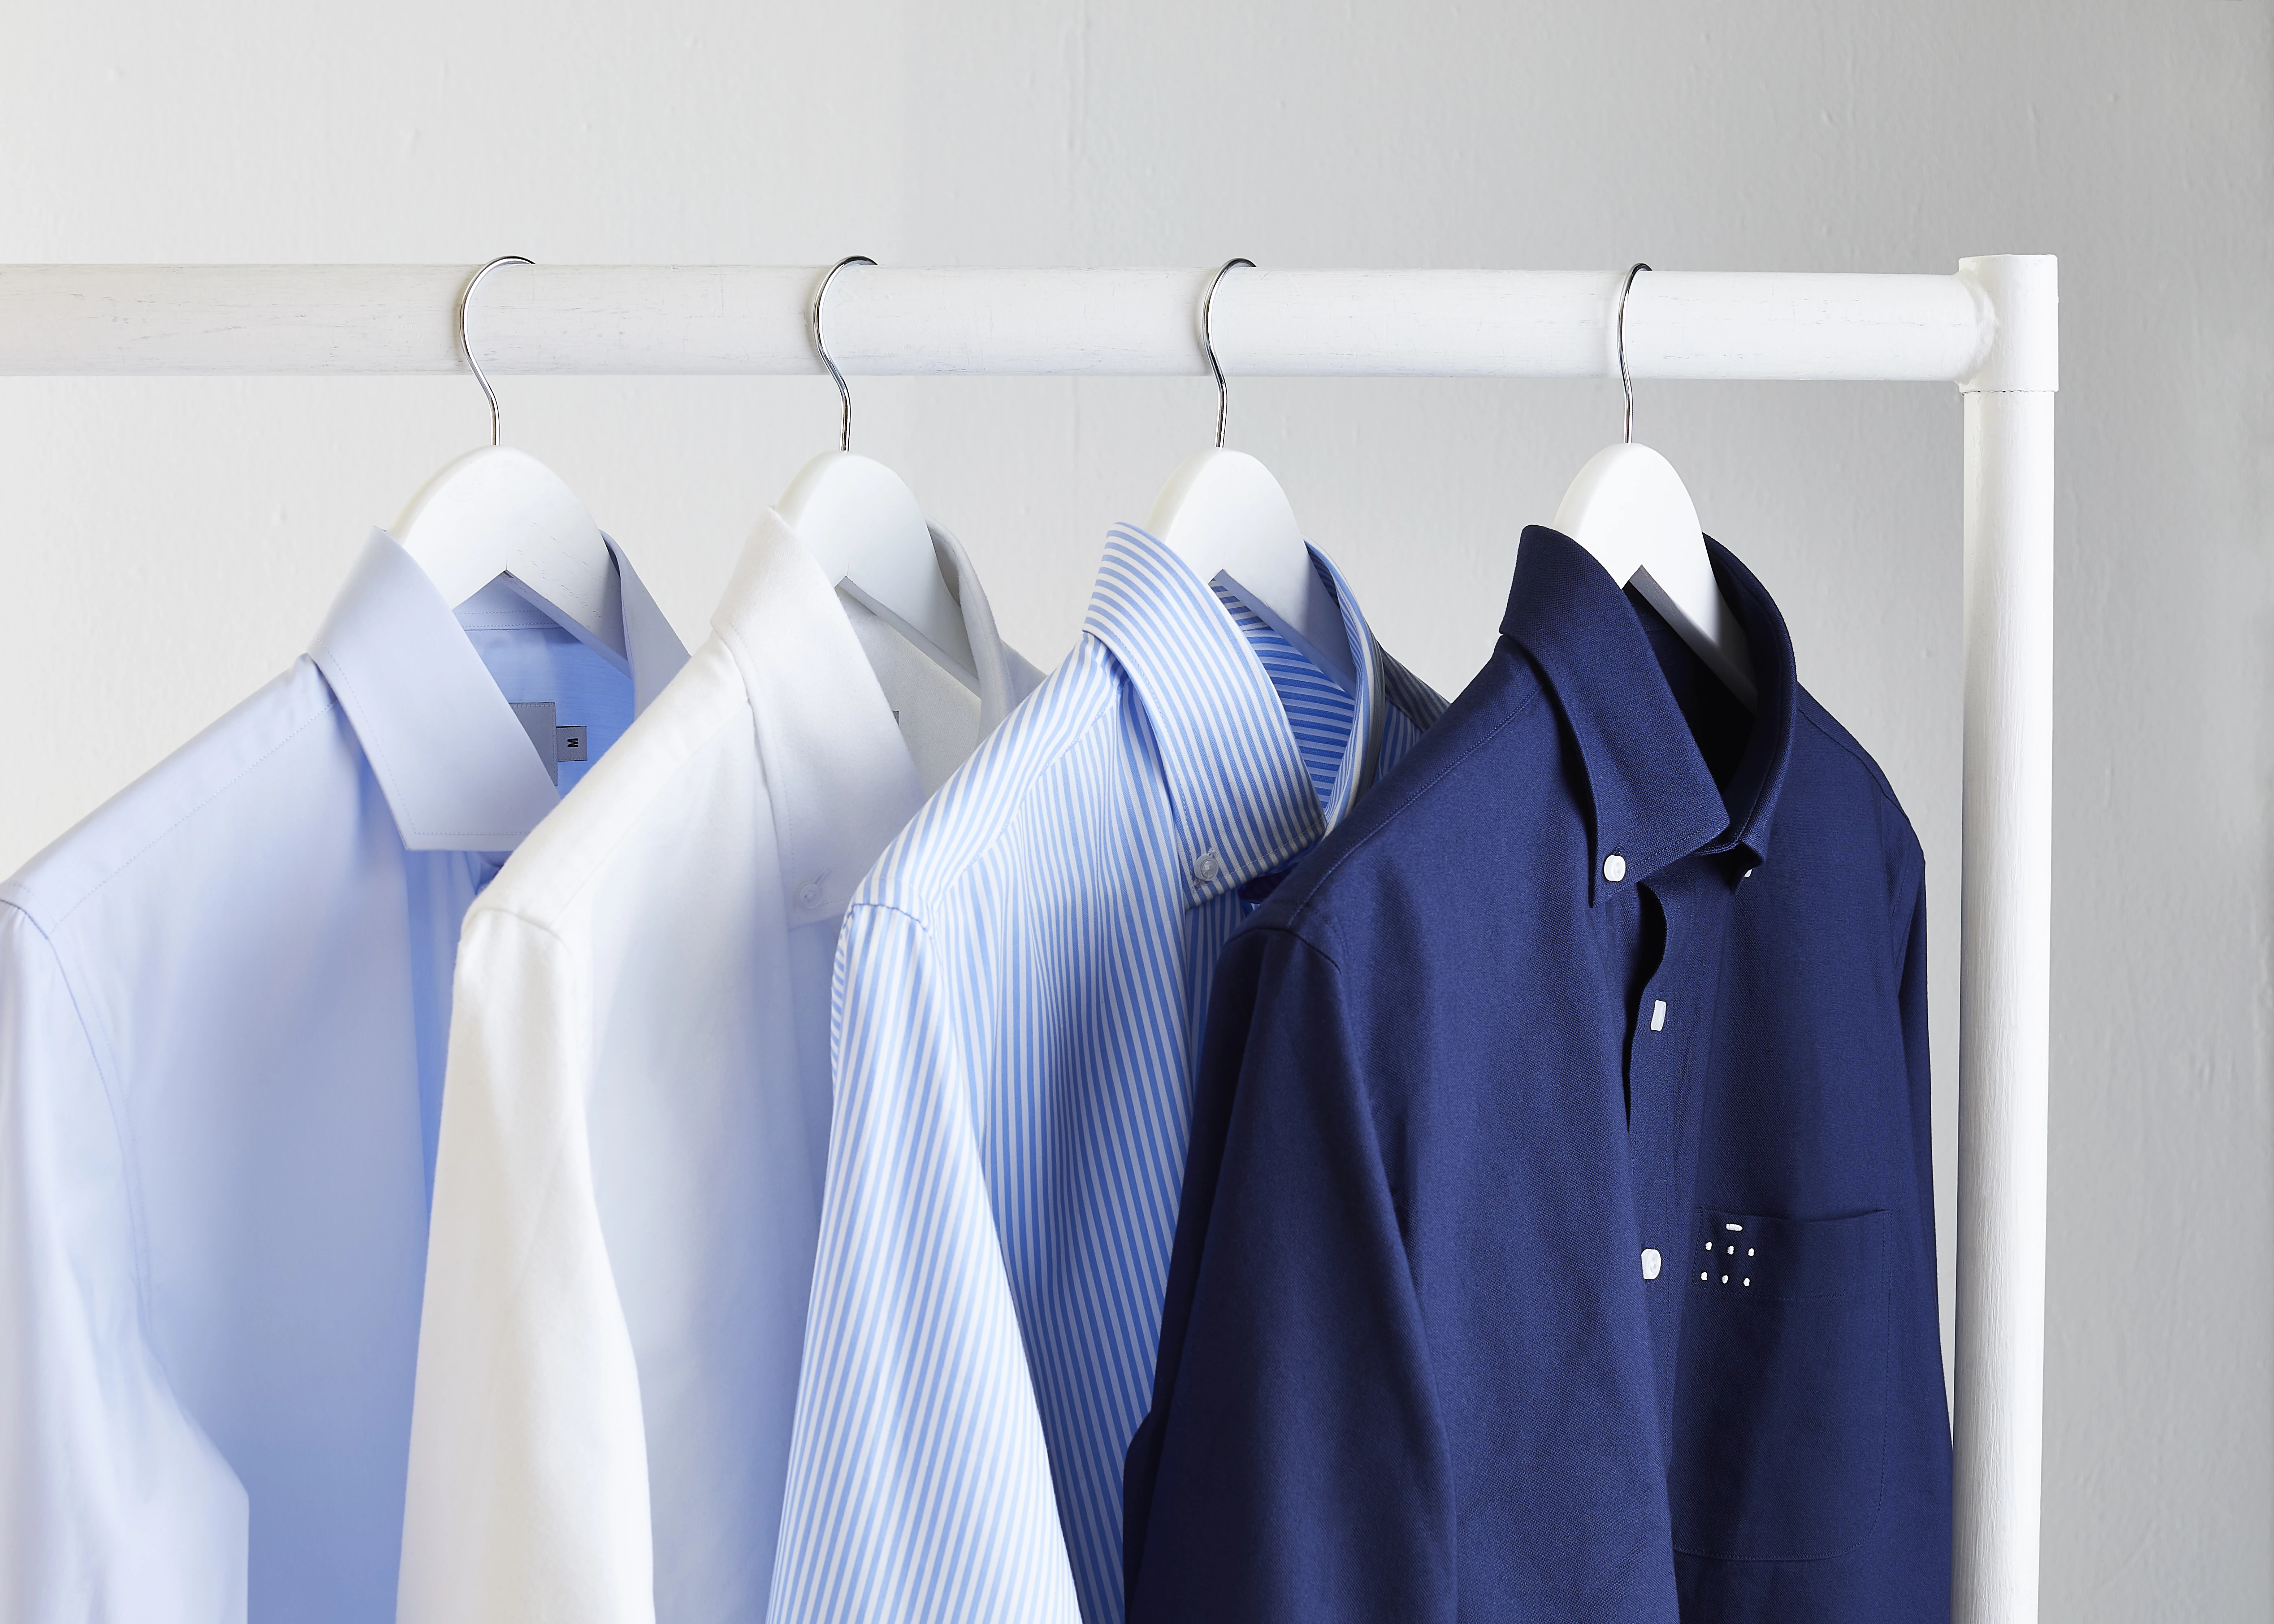 The Shirt Society offers a range of formal and casual shirts.